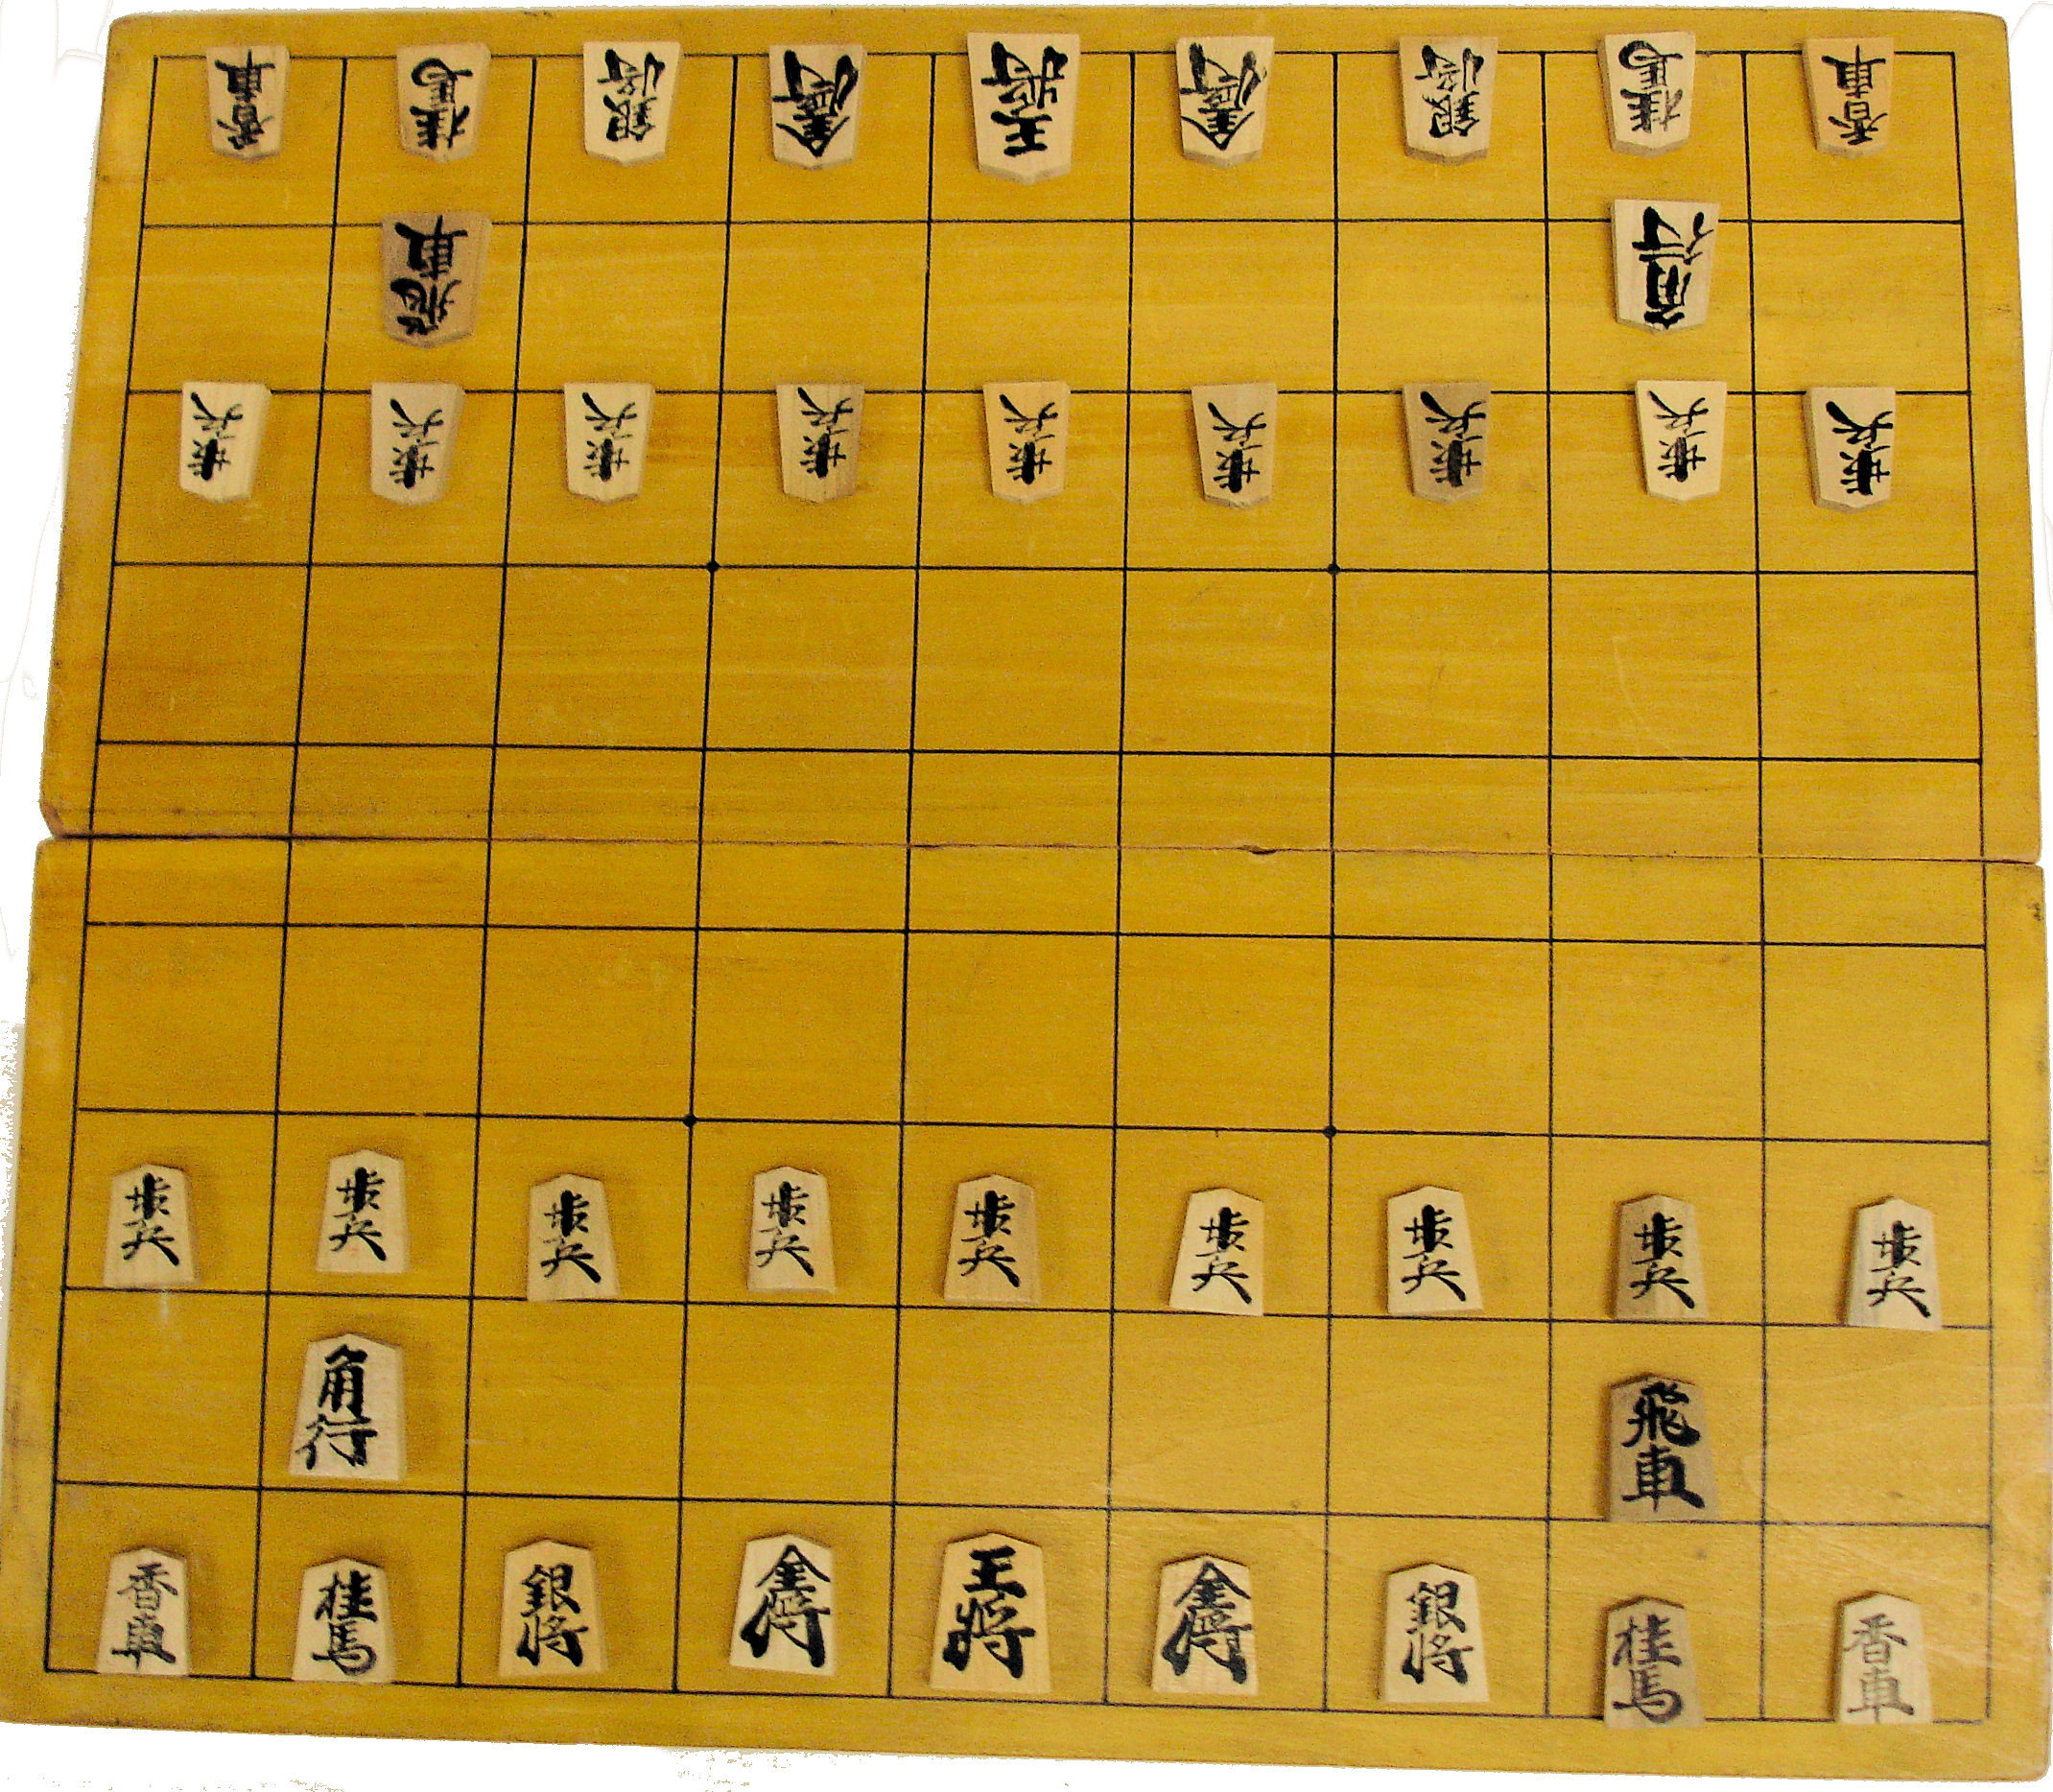 Shogi - the Japanese form of chess